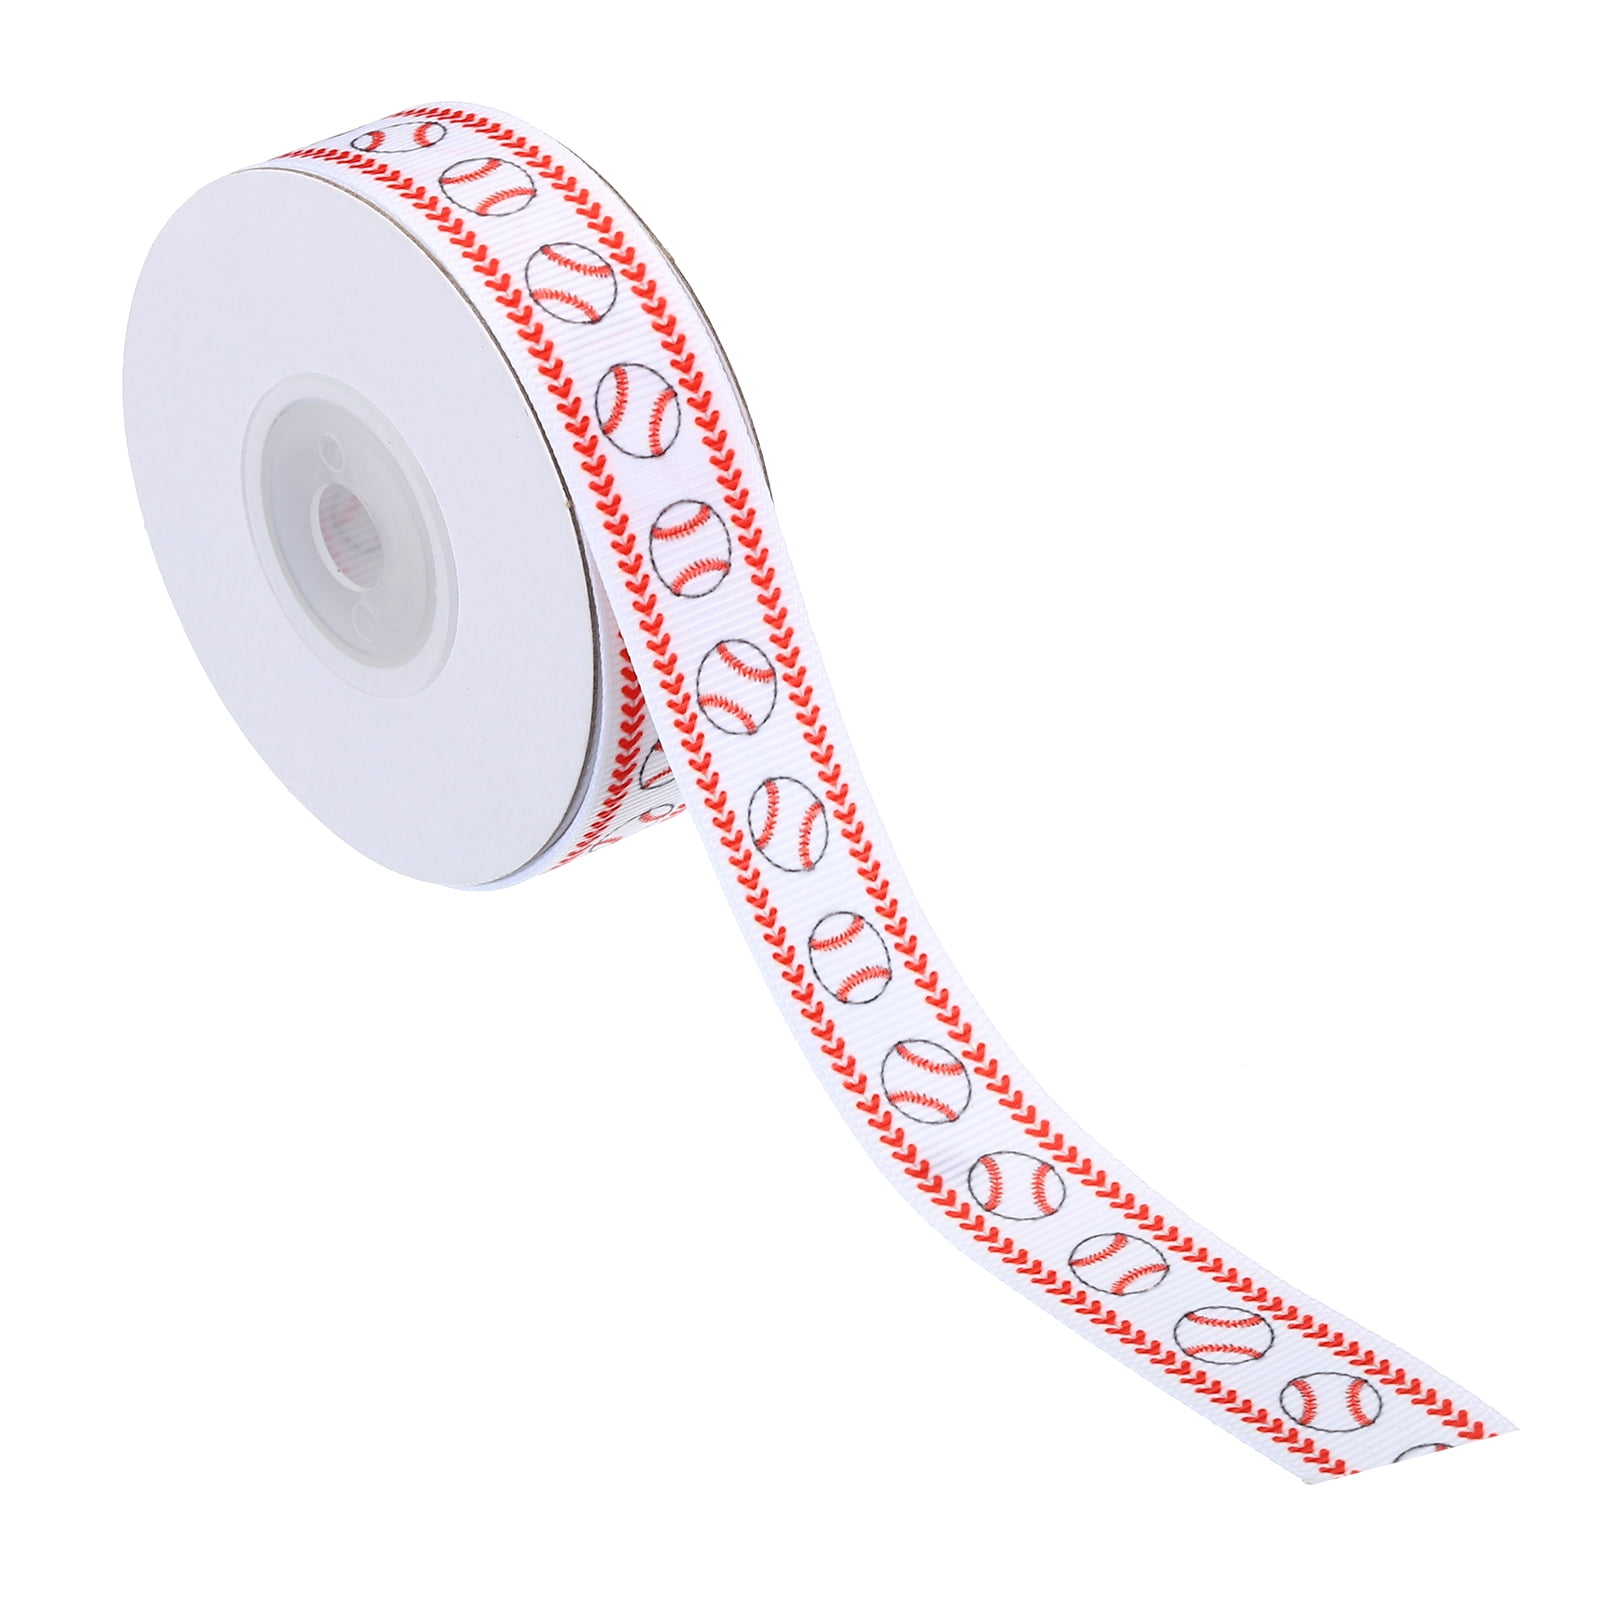 10 Yards Ribbon for Gift Wrapping, 22mm Baseball Ribbons for